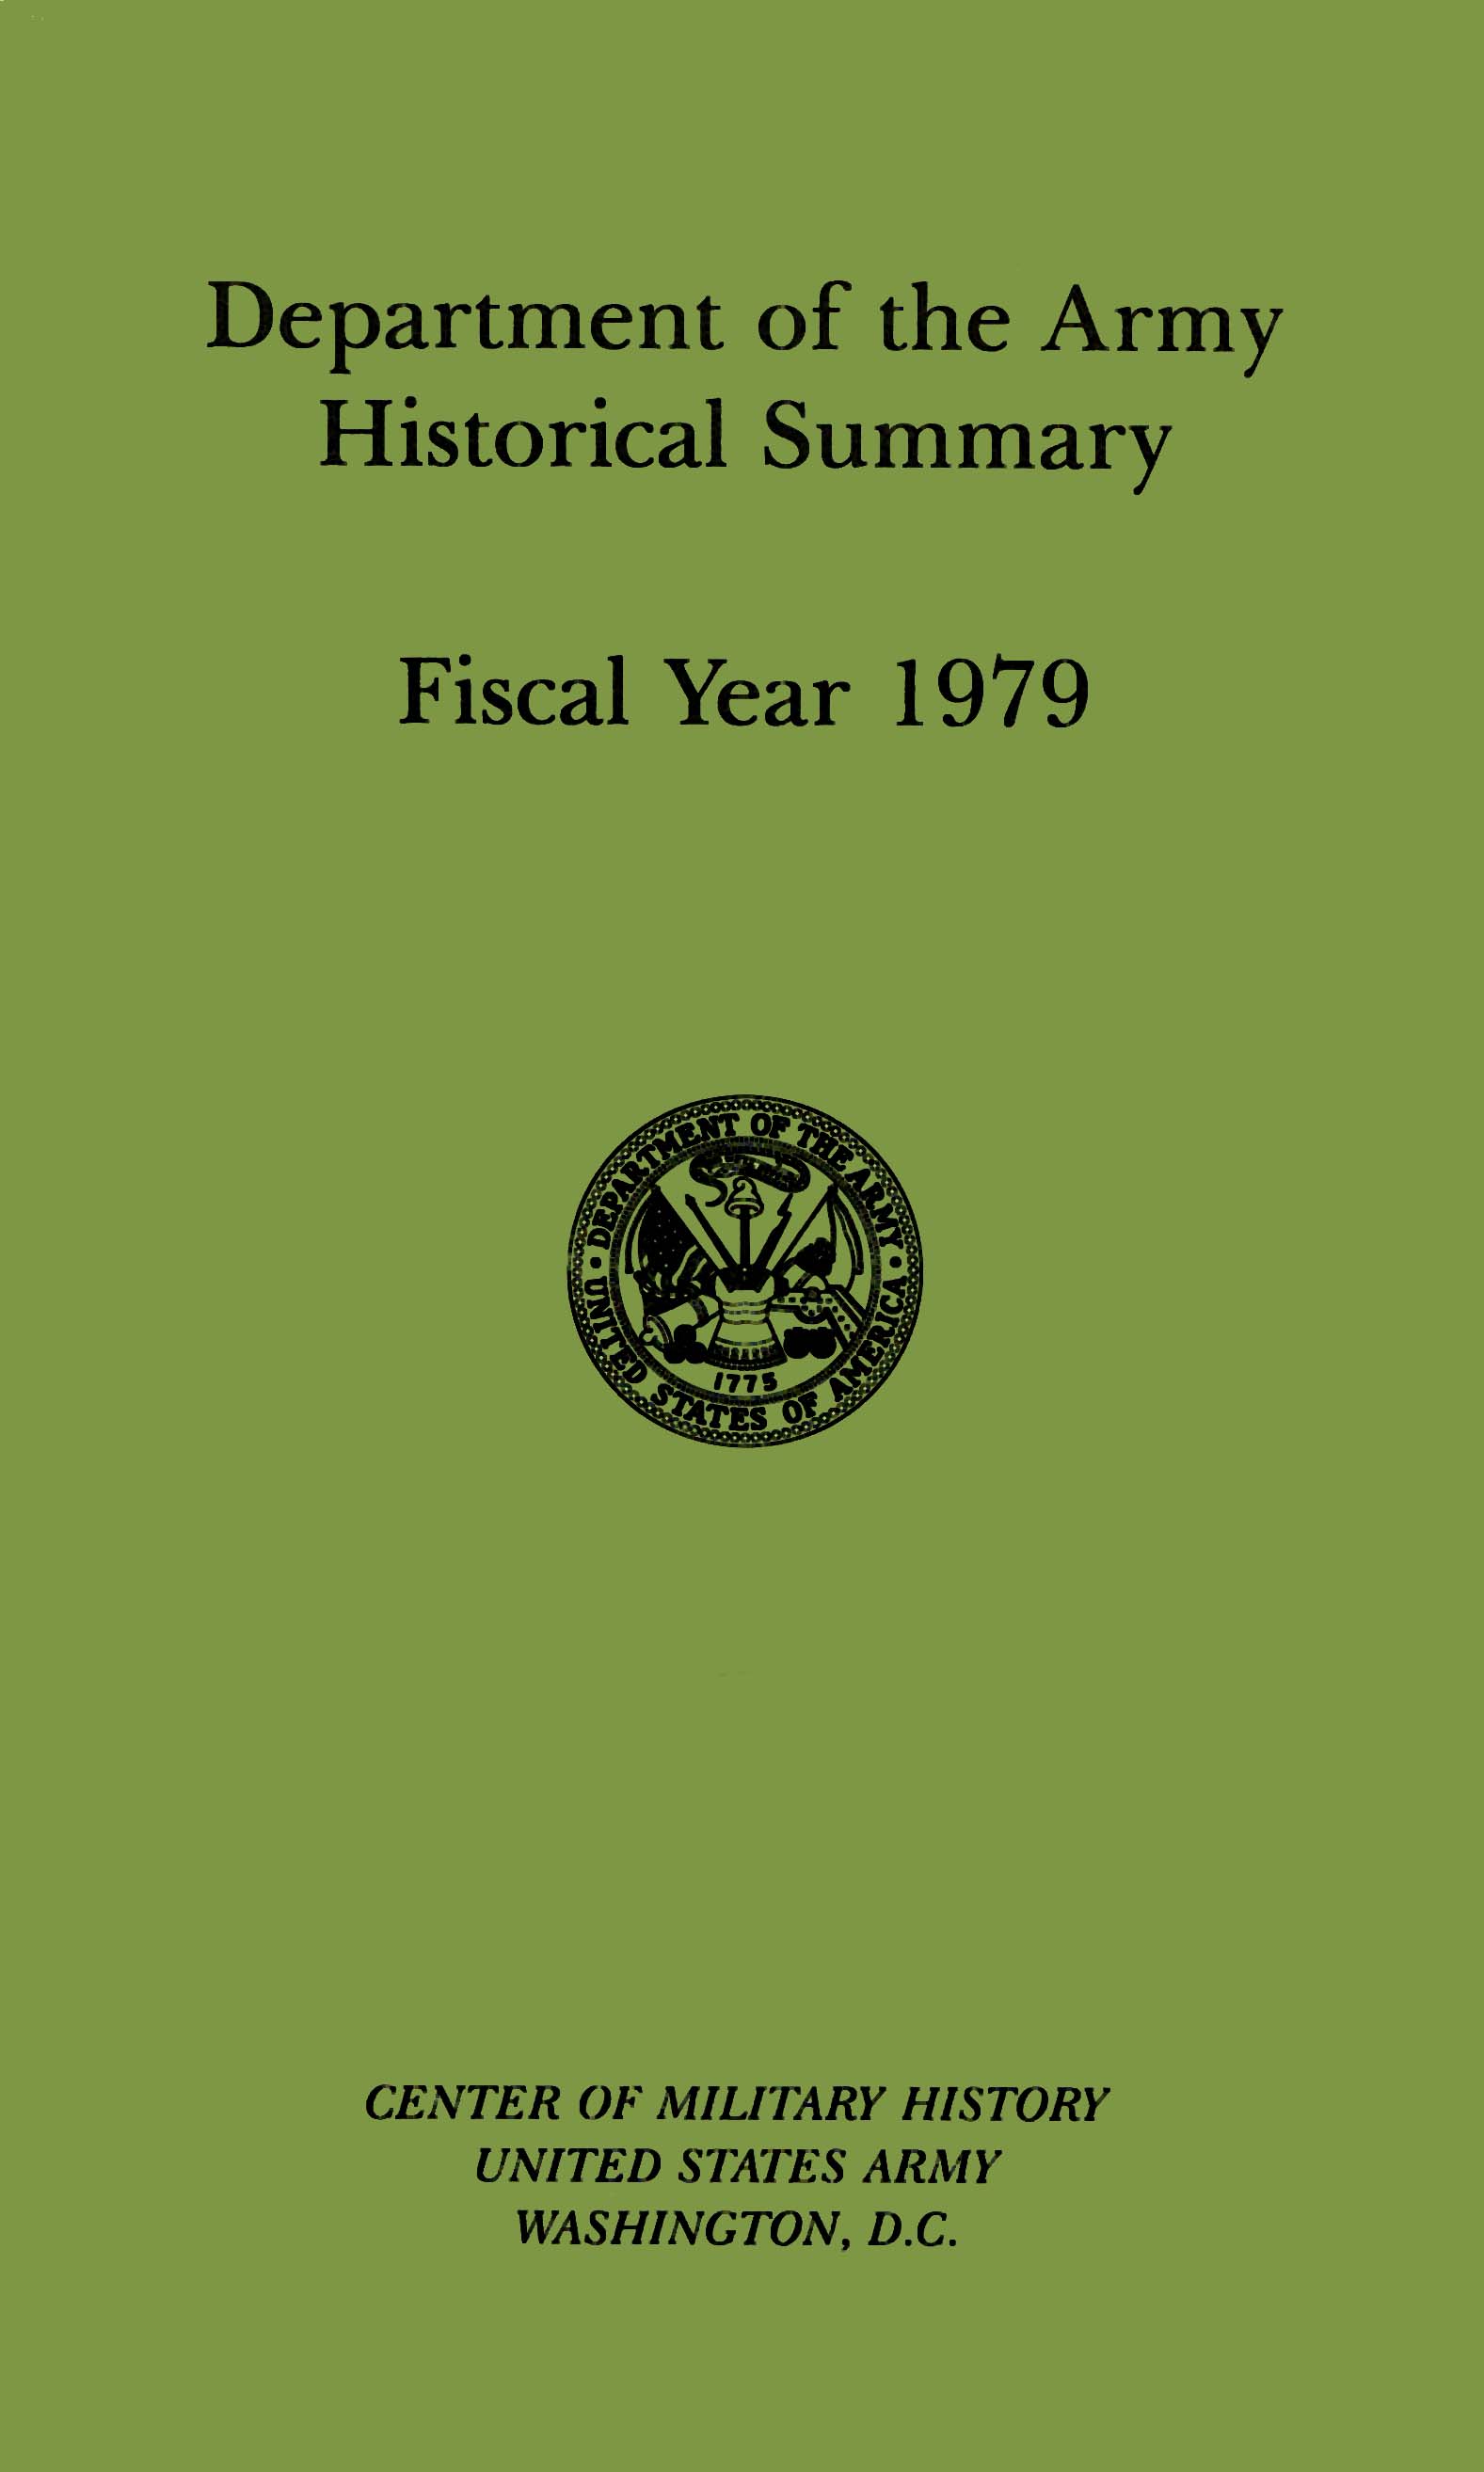 Department of the Army Historical Summary - Fiscal Year 1979